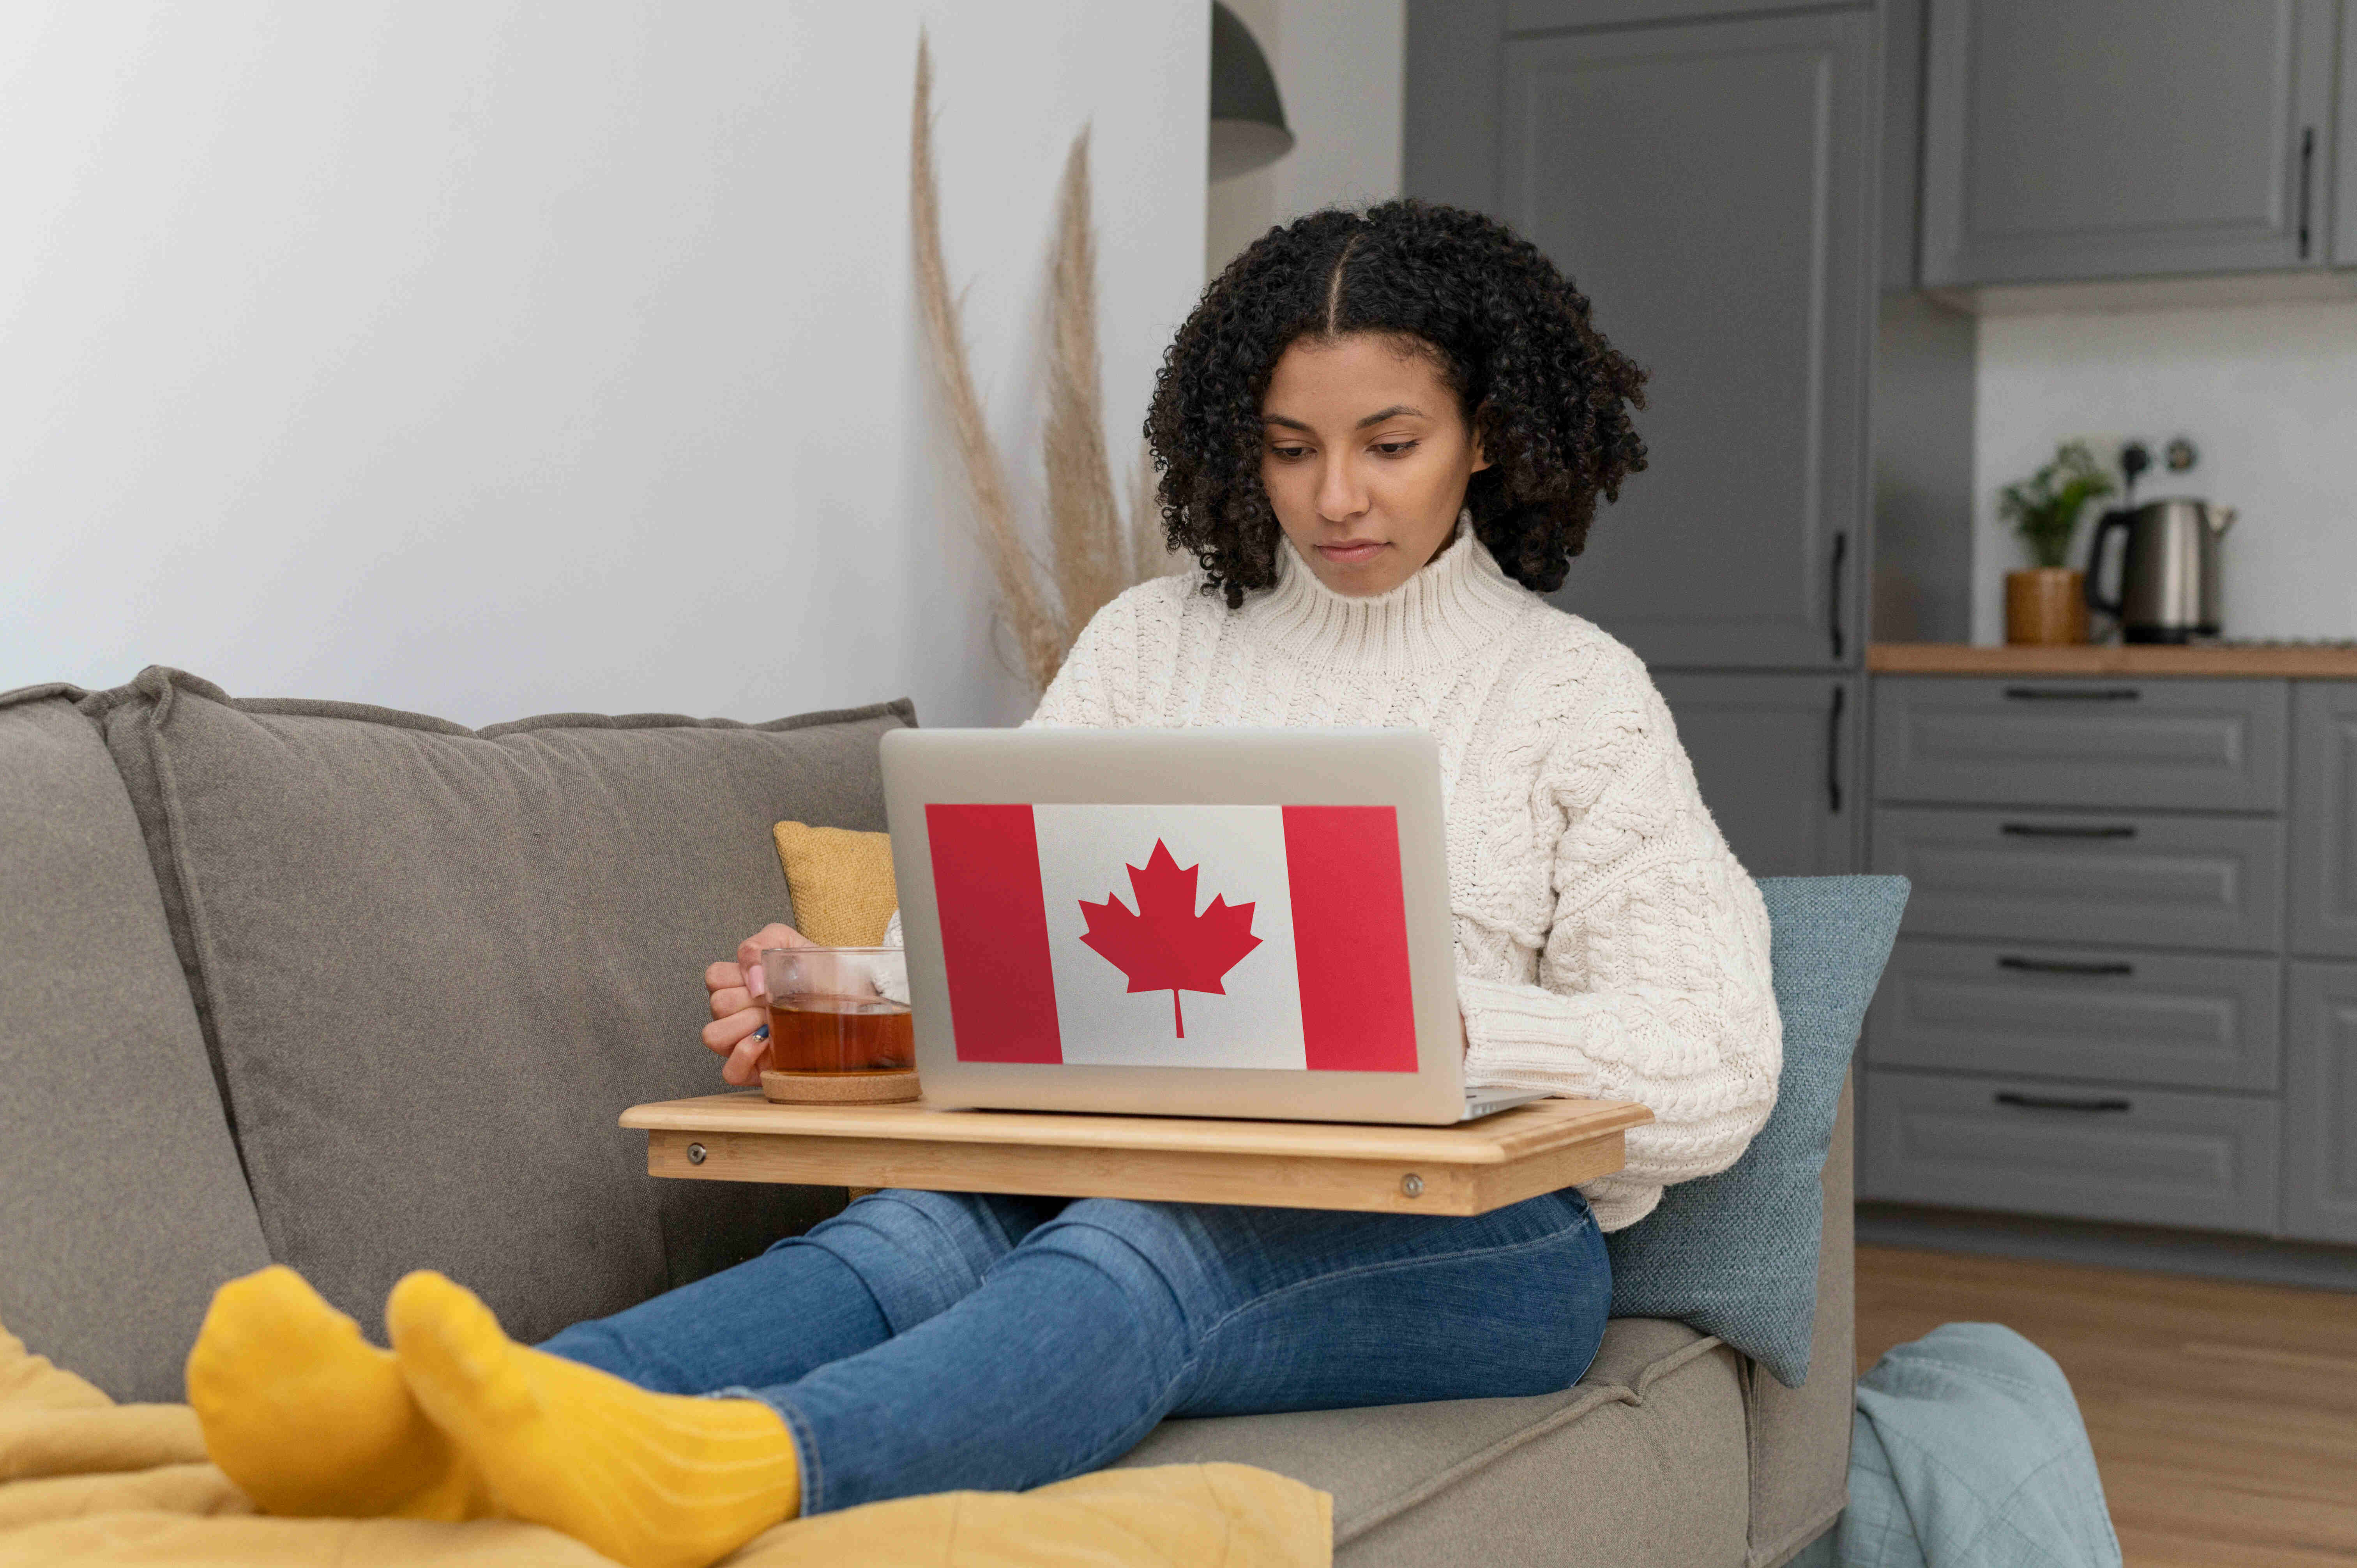 🌟 Immerse yourself in Canada's vibrant campus culture! Explore expert recommendations from the <a href="https://msmunifystudyabroadcounsultant.medium.com/getting-involved-on-canadian-campuses-education-consultants-recommendations-5c2b3ed35ec5/">best consultancy for studying in Canada </a> to maximize your academic journey.🍁